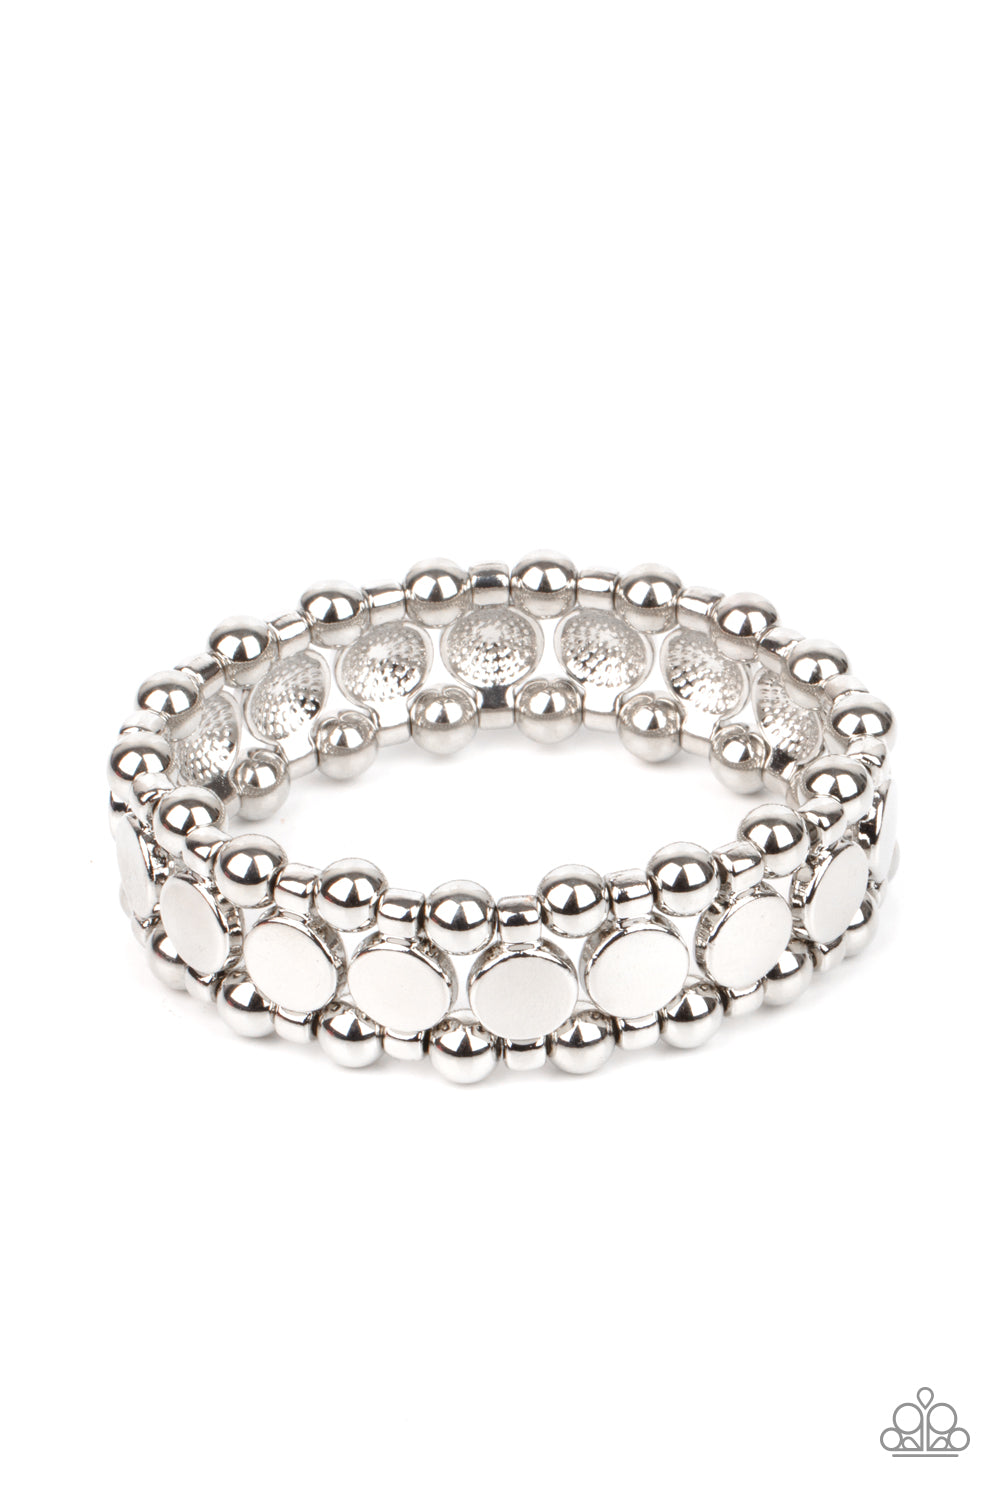 Paparazzi Metro Magnetism - Silver Bracelet - A Finishing Touch Jewelry